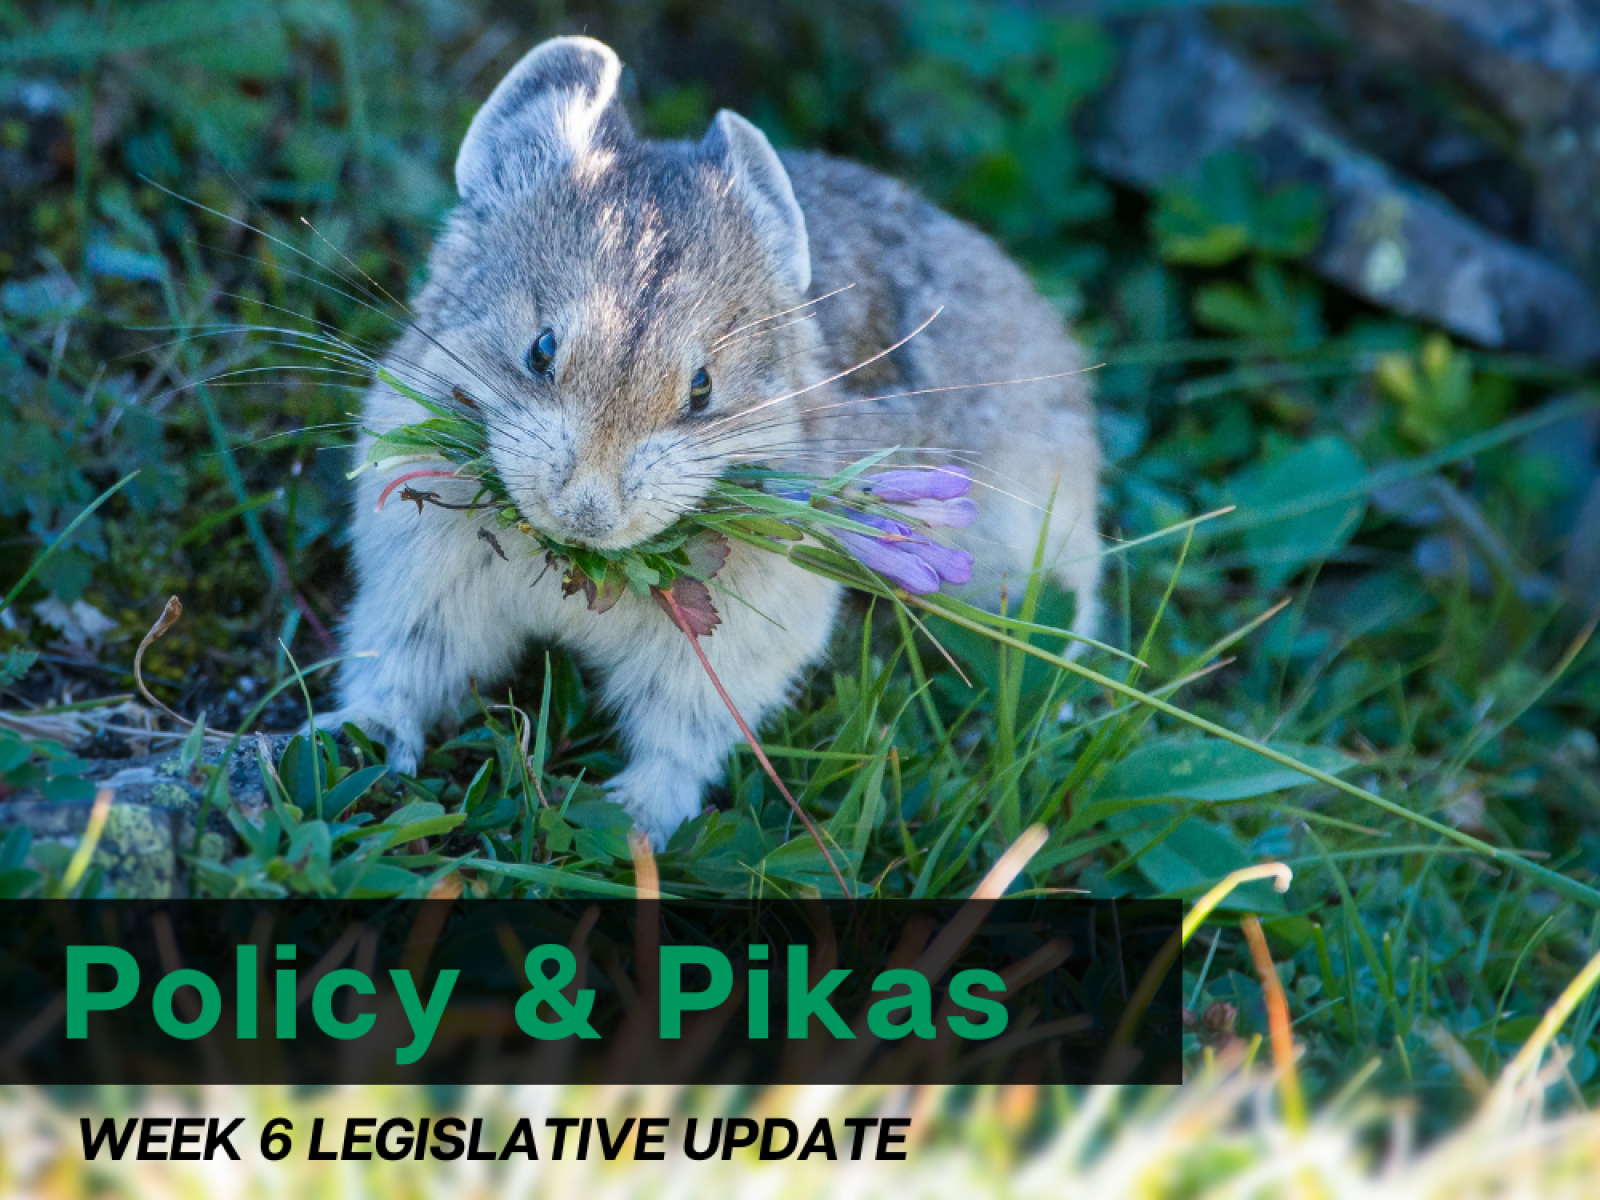 Policy and Pikas: Week 6 Session Recap